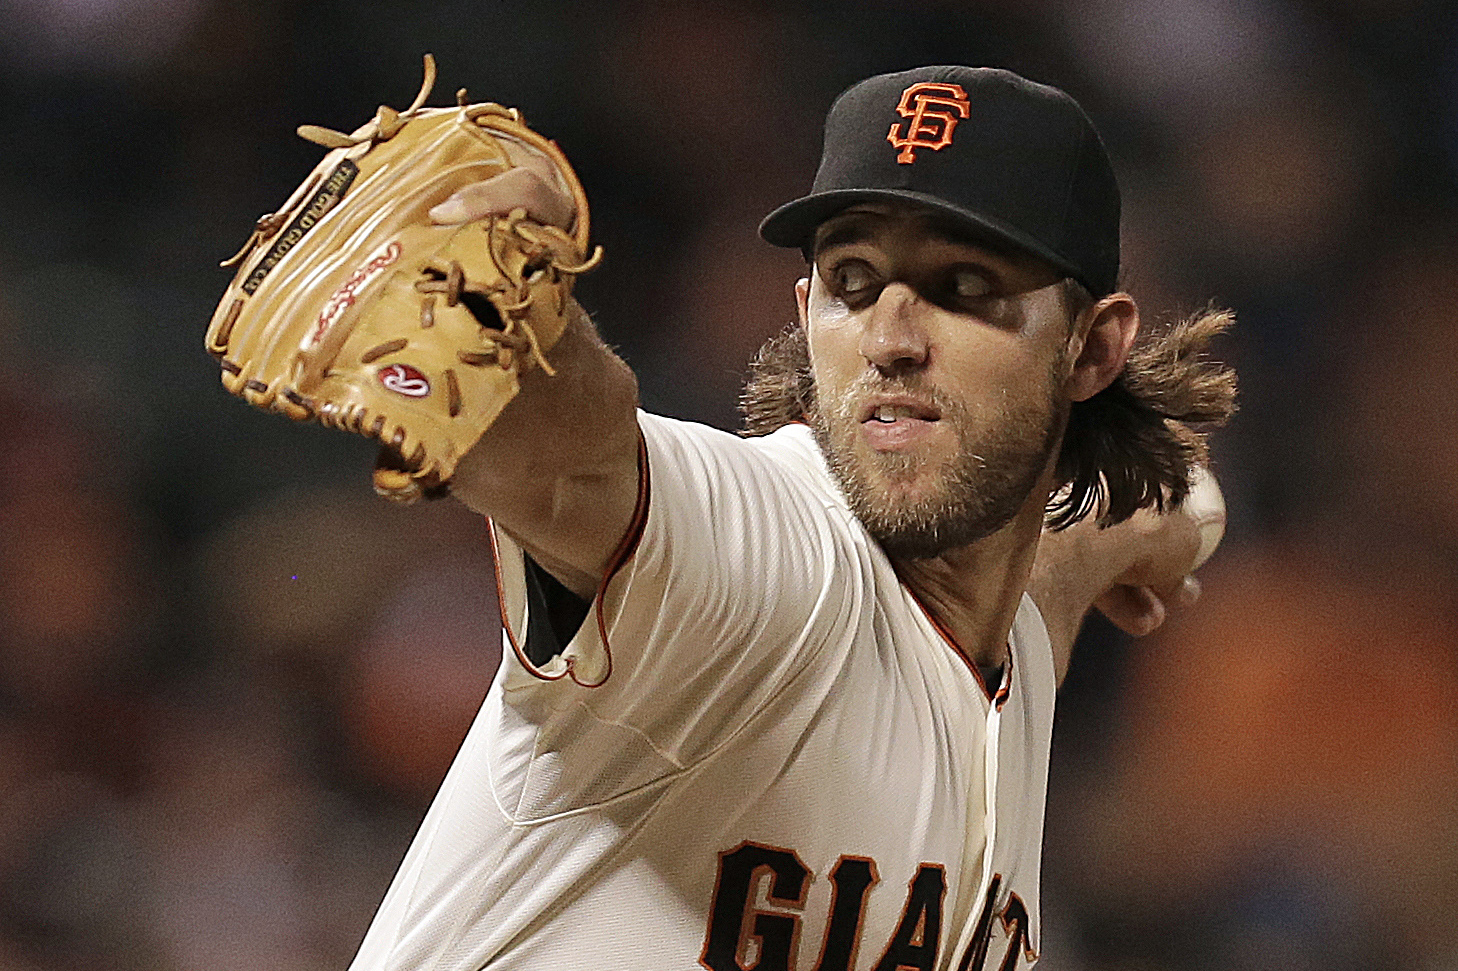 Giants' Madison Bumgarner: “I'm ready to help contribute, like I should've  been doing this whole time” – Marin Independent Journal